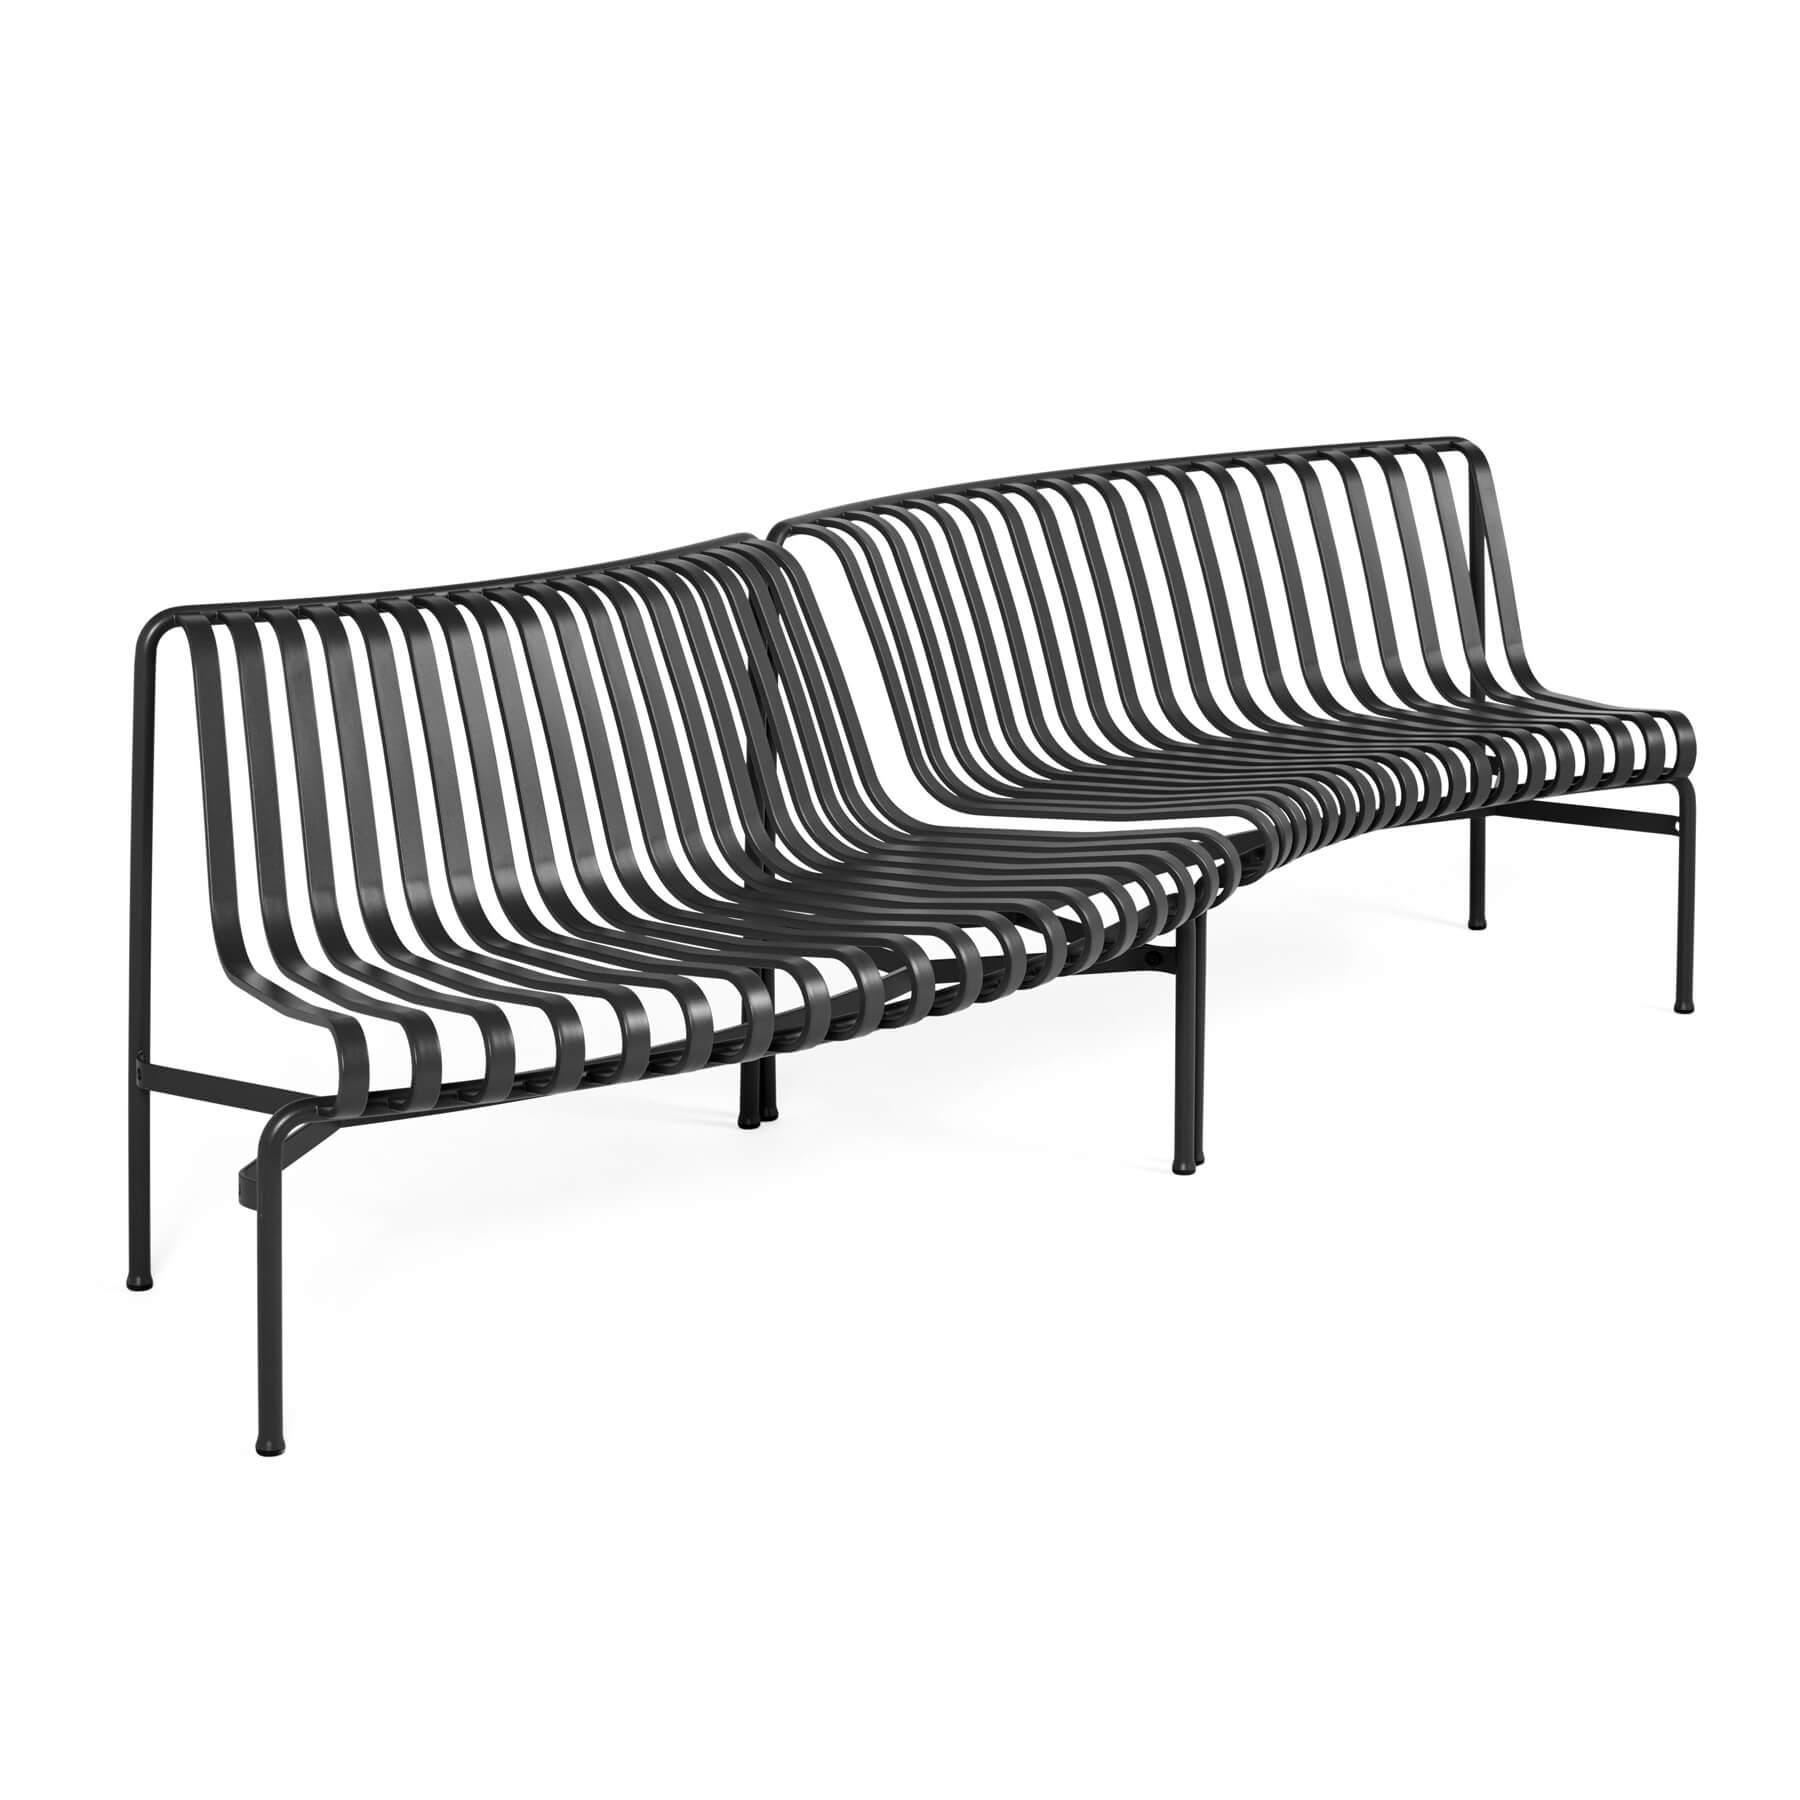 Hay Palissade Park Dining Bench In Out Anthracite Black Designer Furniture From Holloways Of Ludlow